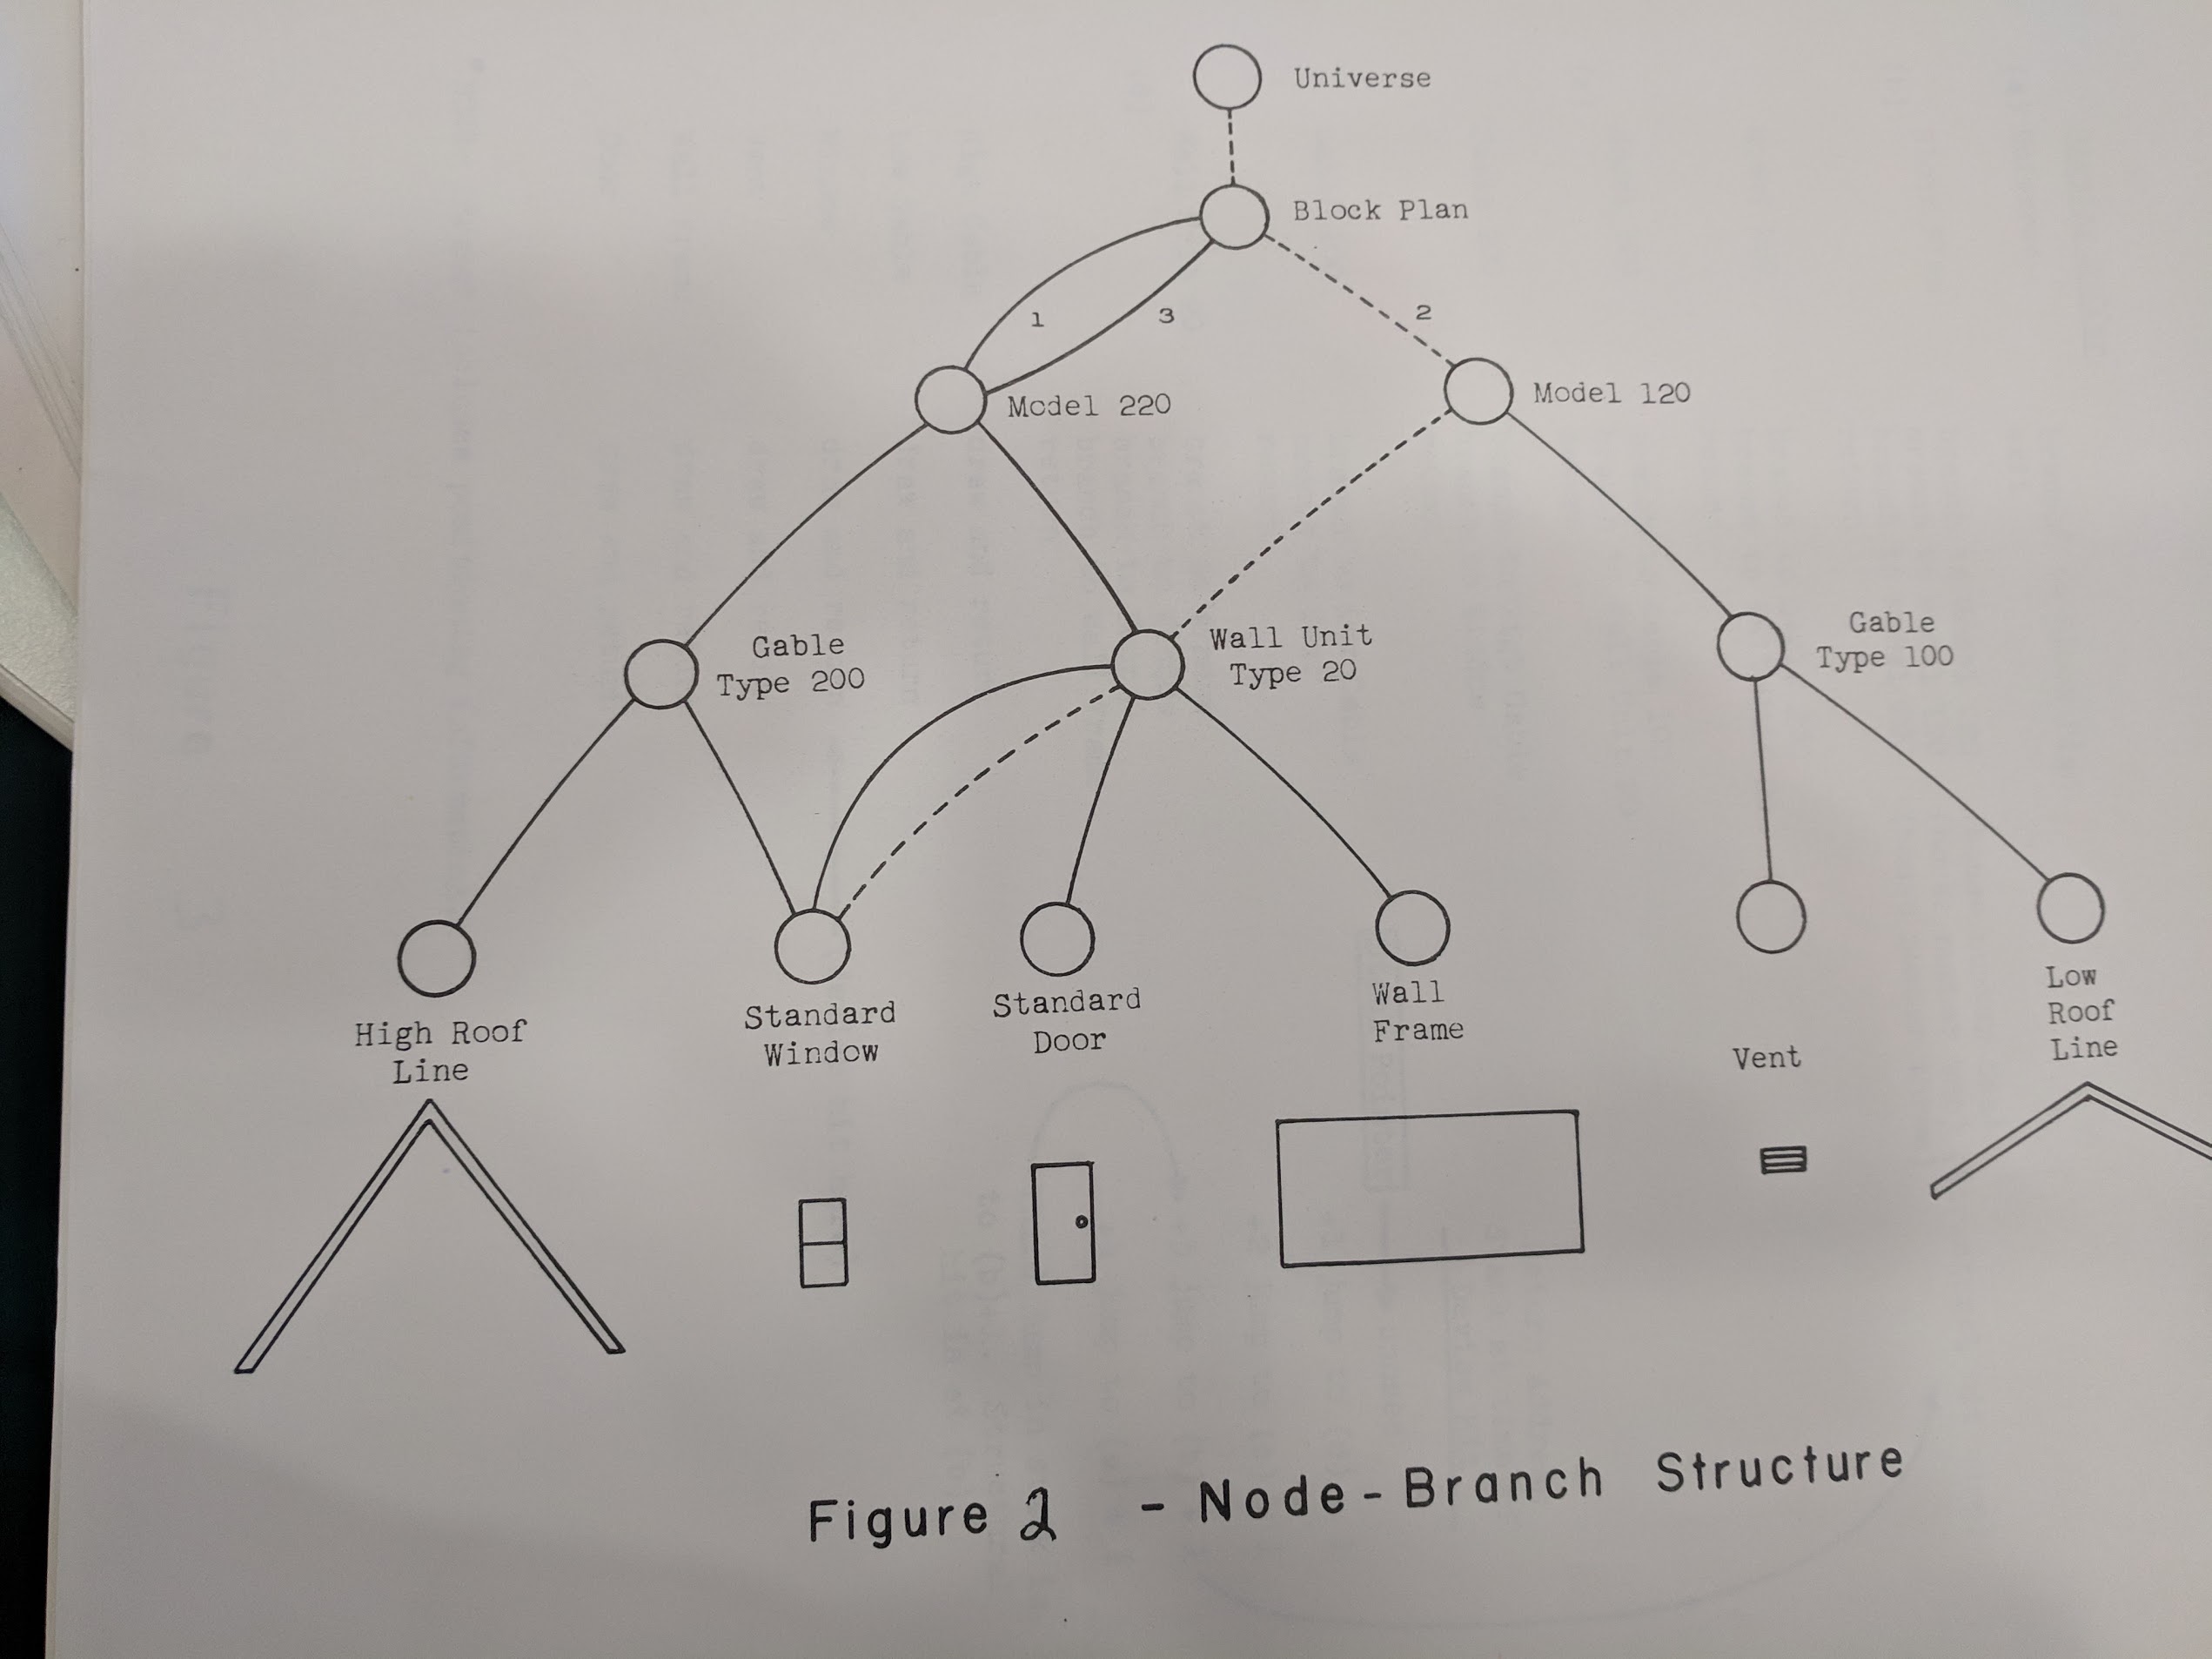 "Node Branch Structure" featuring the pieces of a house abstracted into a directed graph structure. This is similar to what is called a "scene graph" in modern computer graphics.